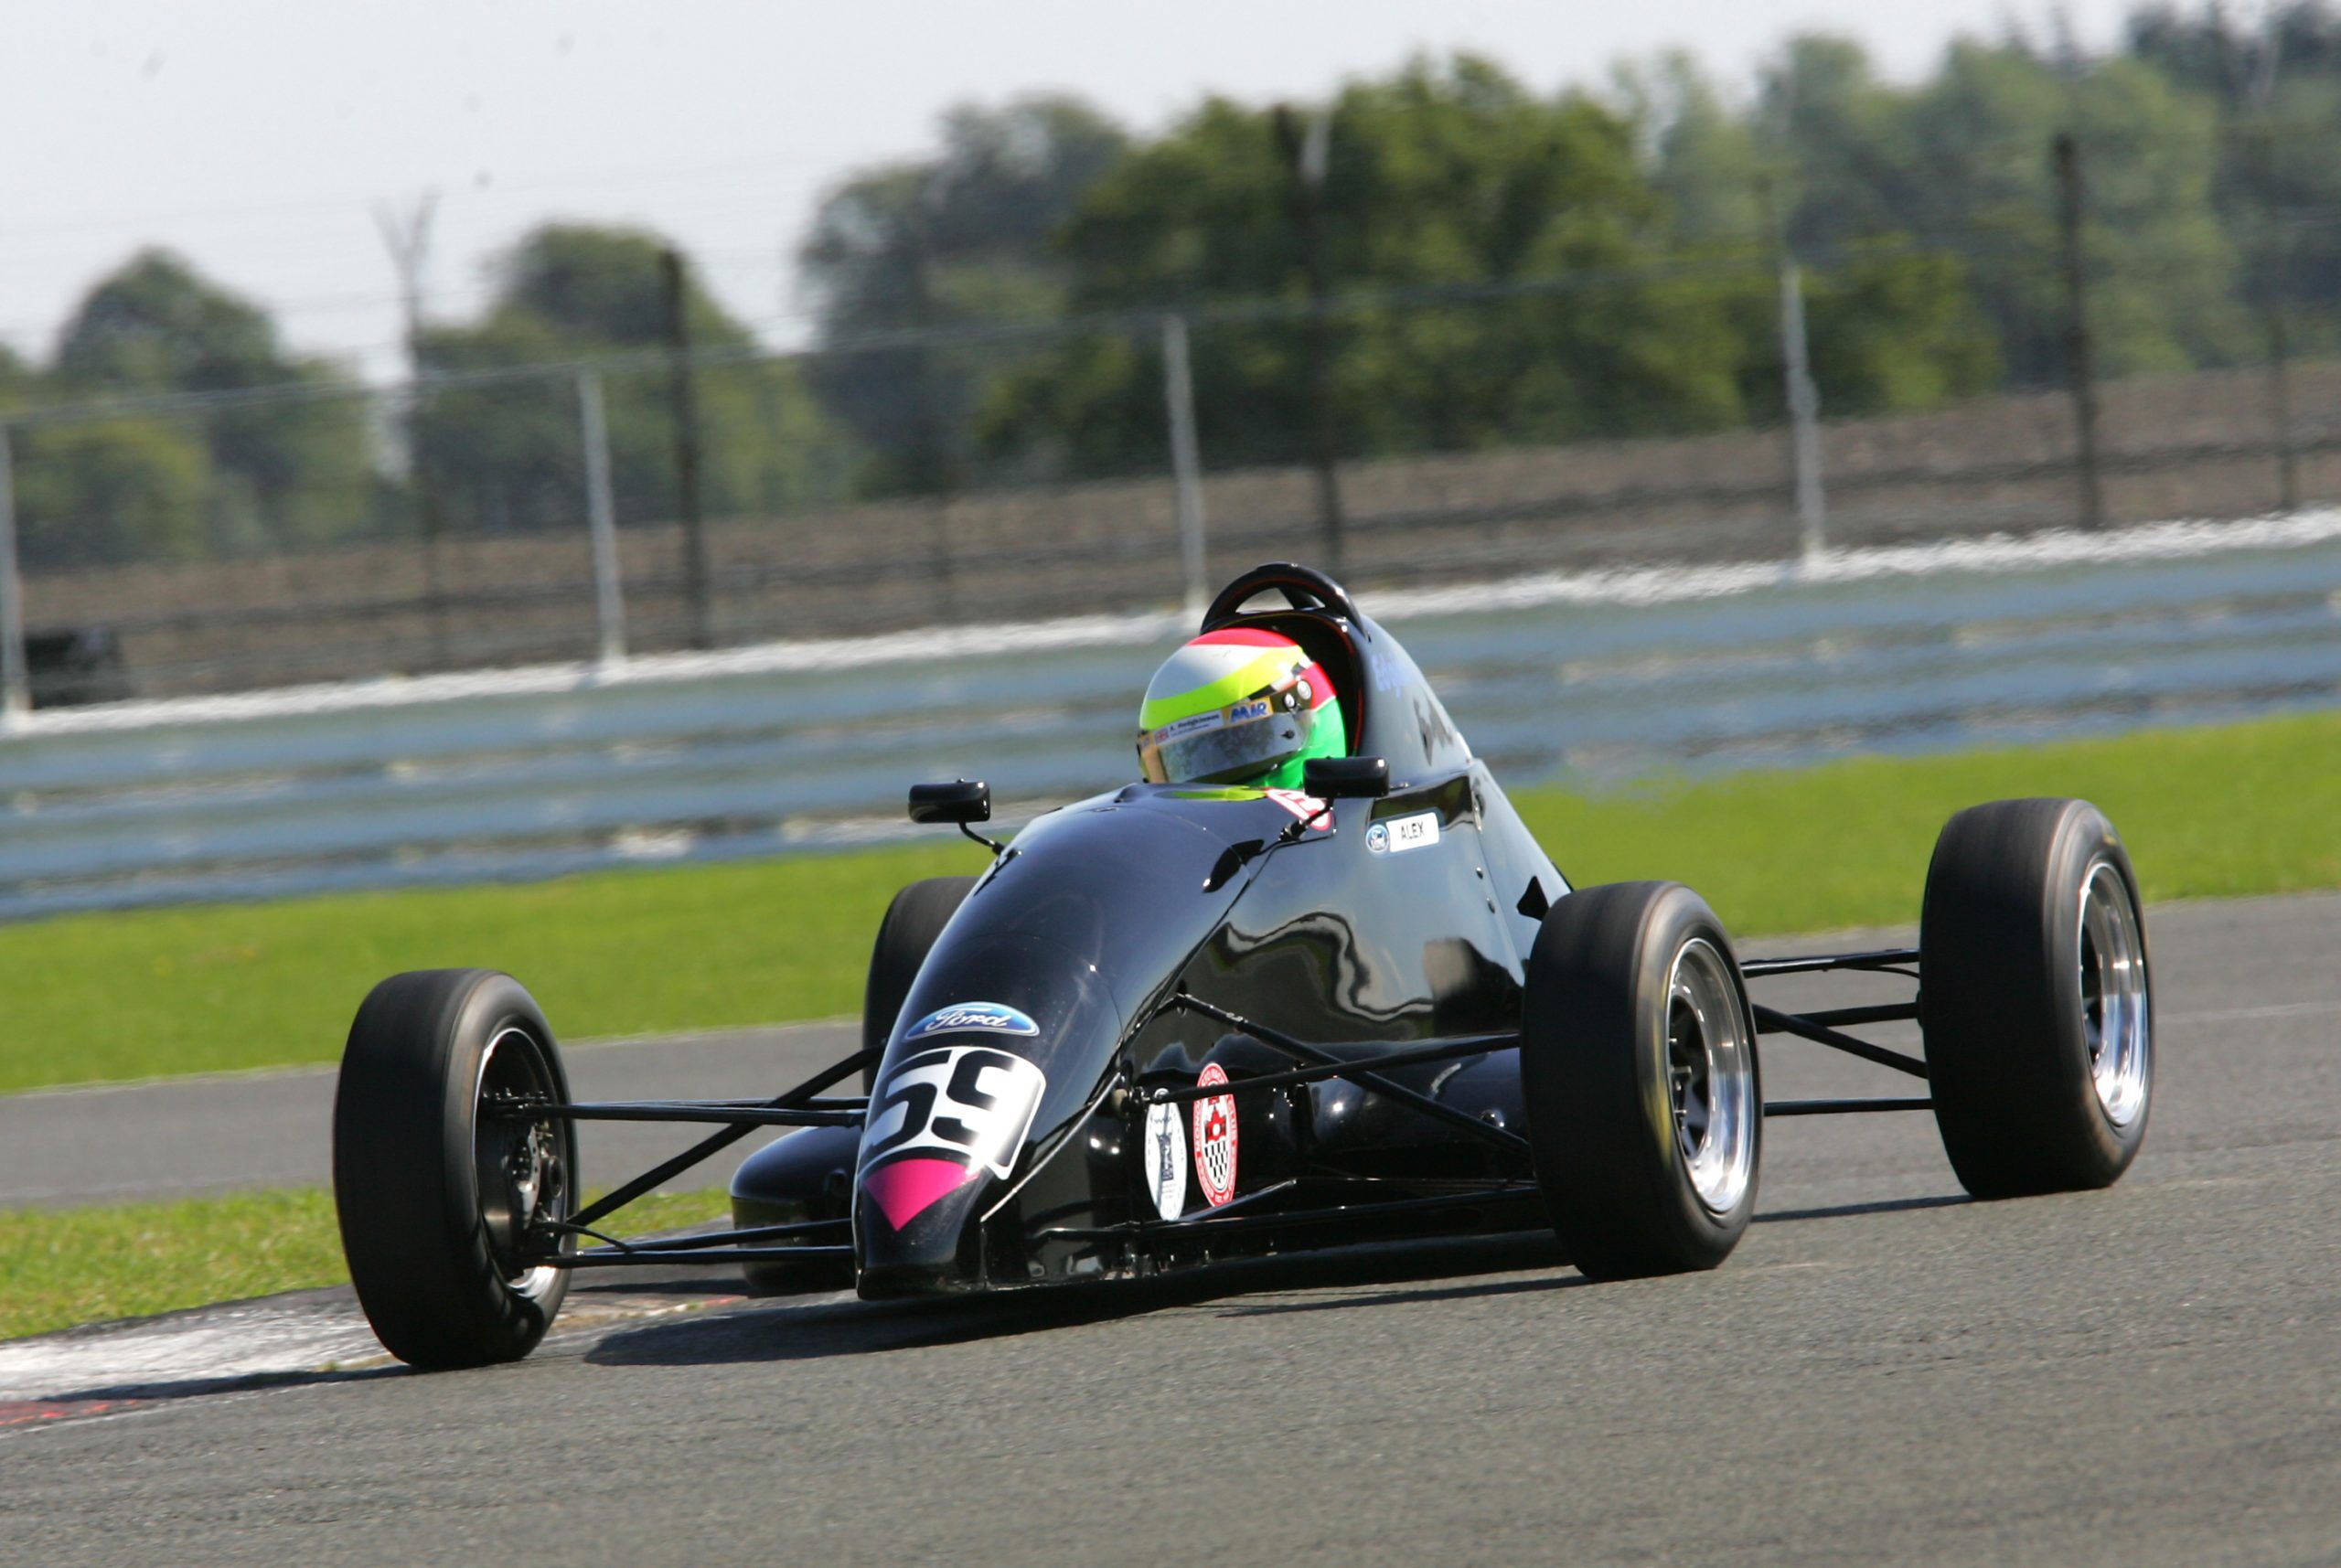 Besides British Endurance and Cup Series, Alex Hodgkinson raced also Junior Single Seaters for two seasons.